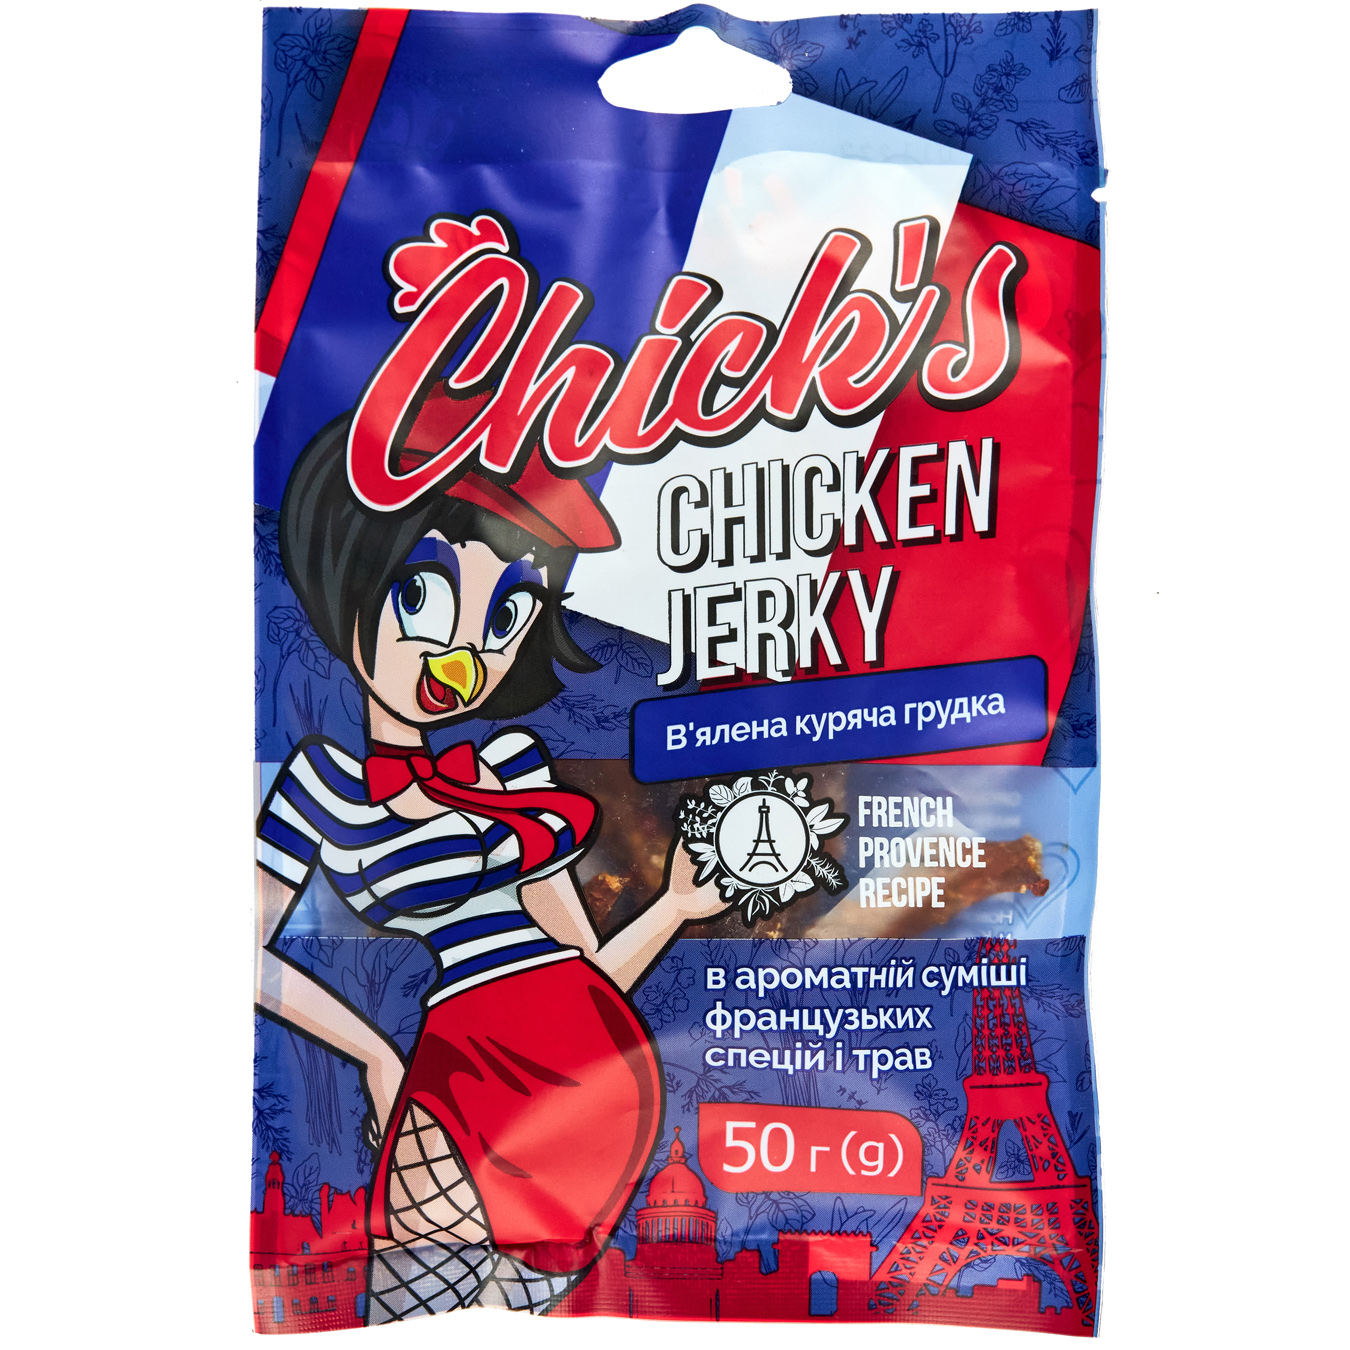 Chick's jerky chicken taste of French Provencal herbs 50g